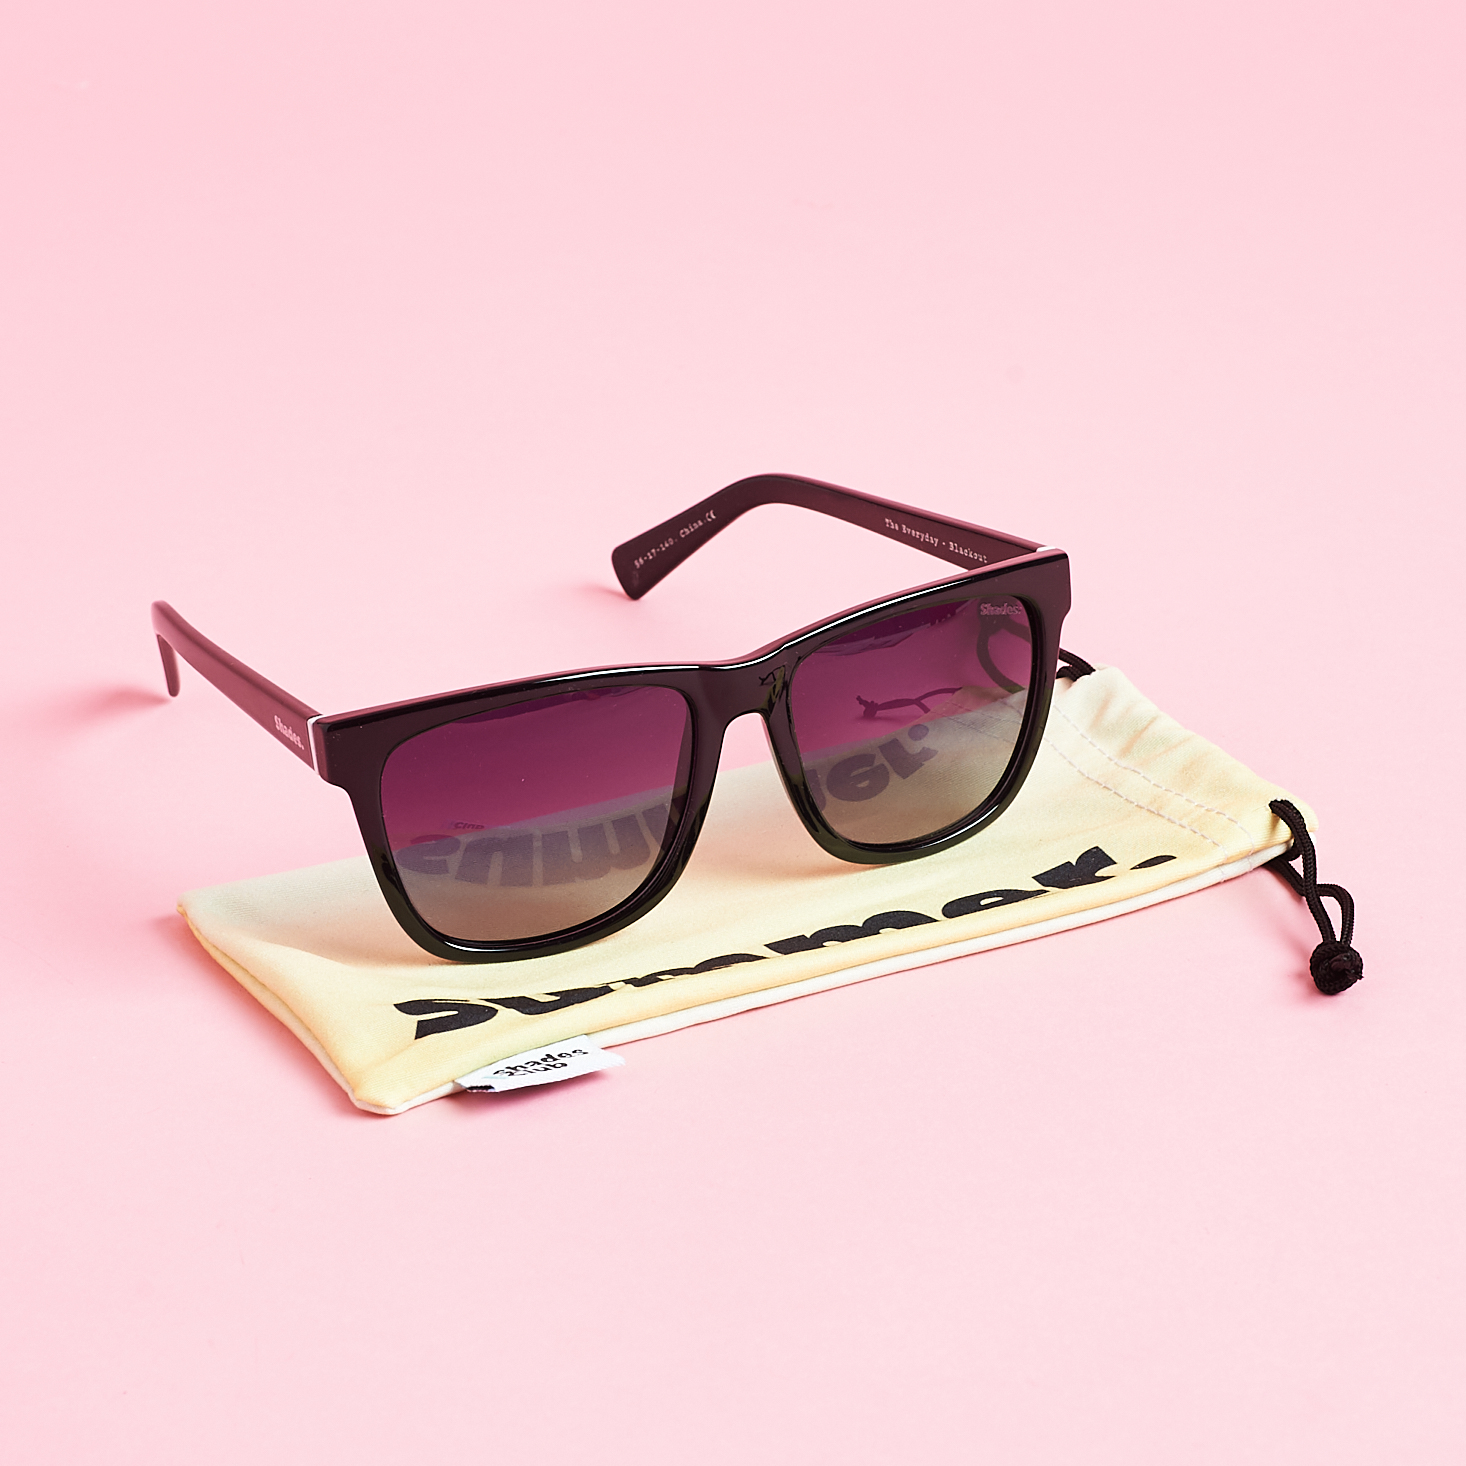 Everday style sunglasses on top of yellow pouch